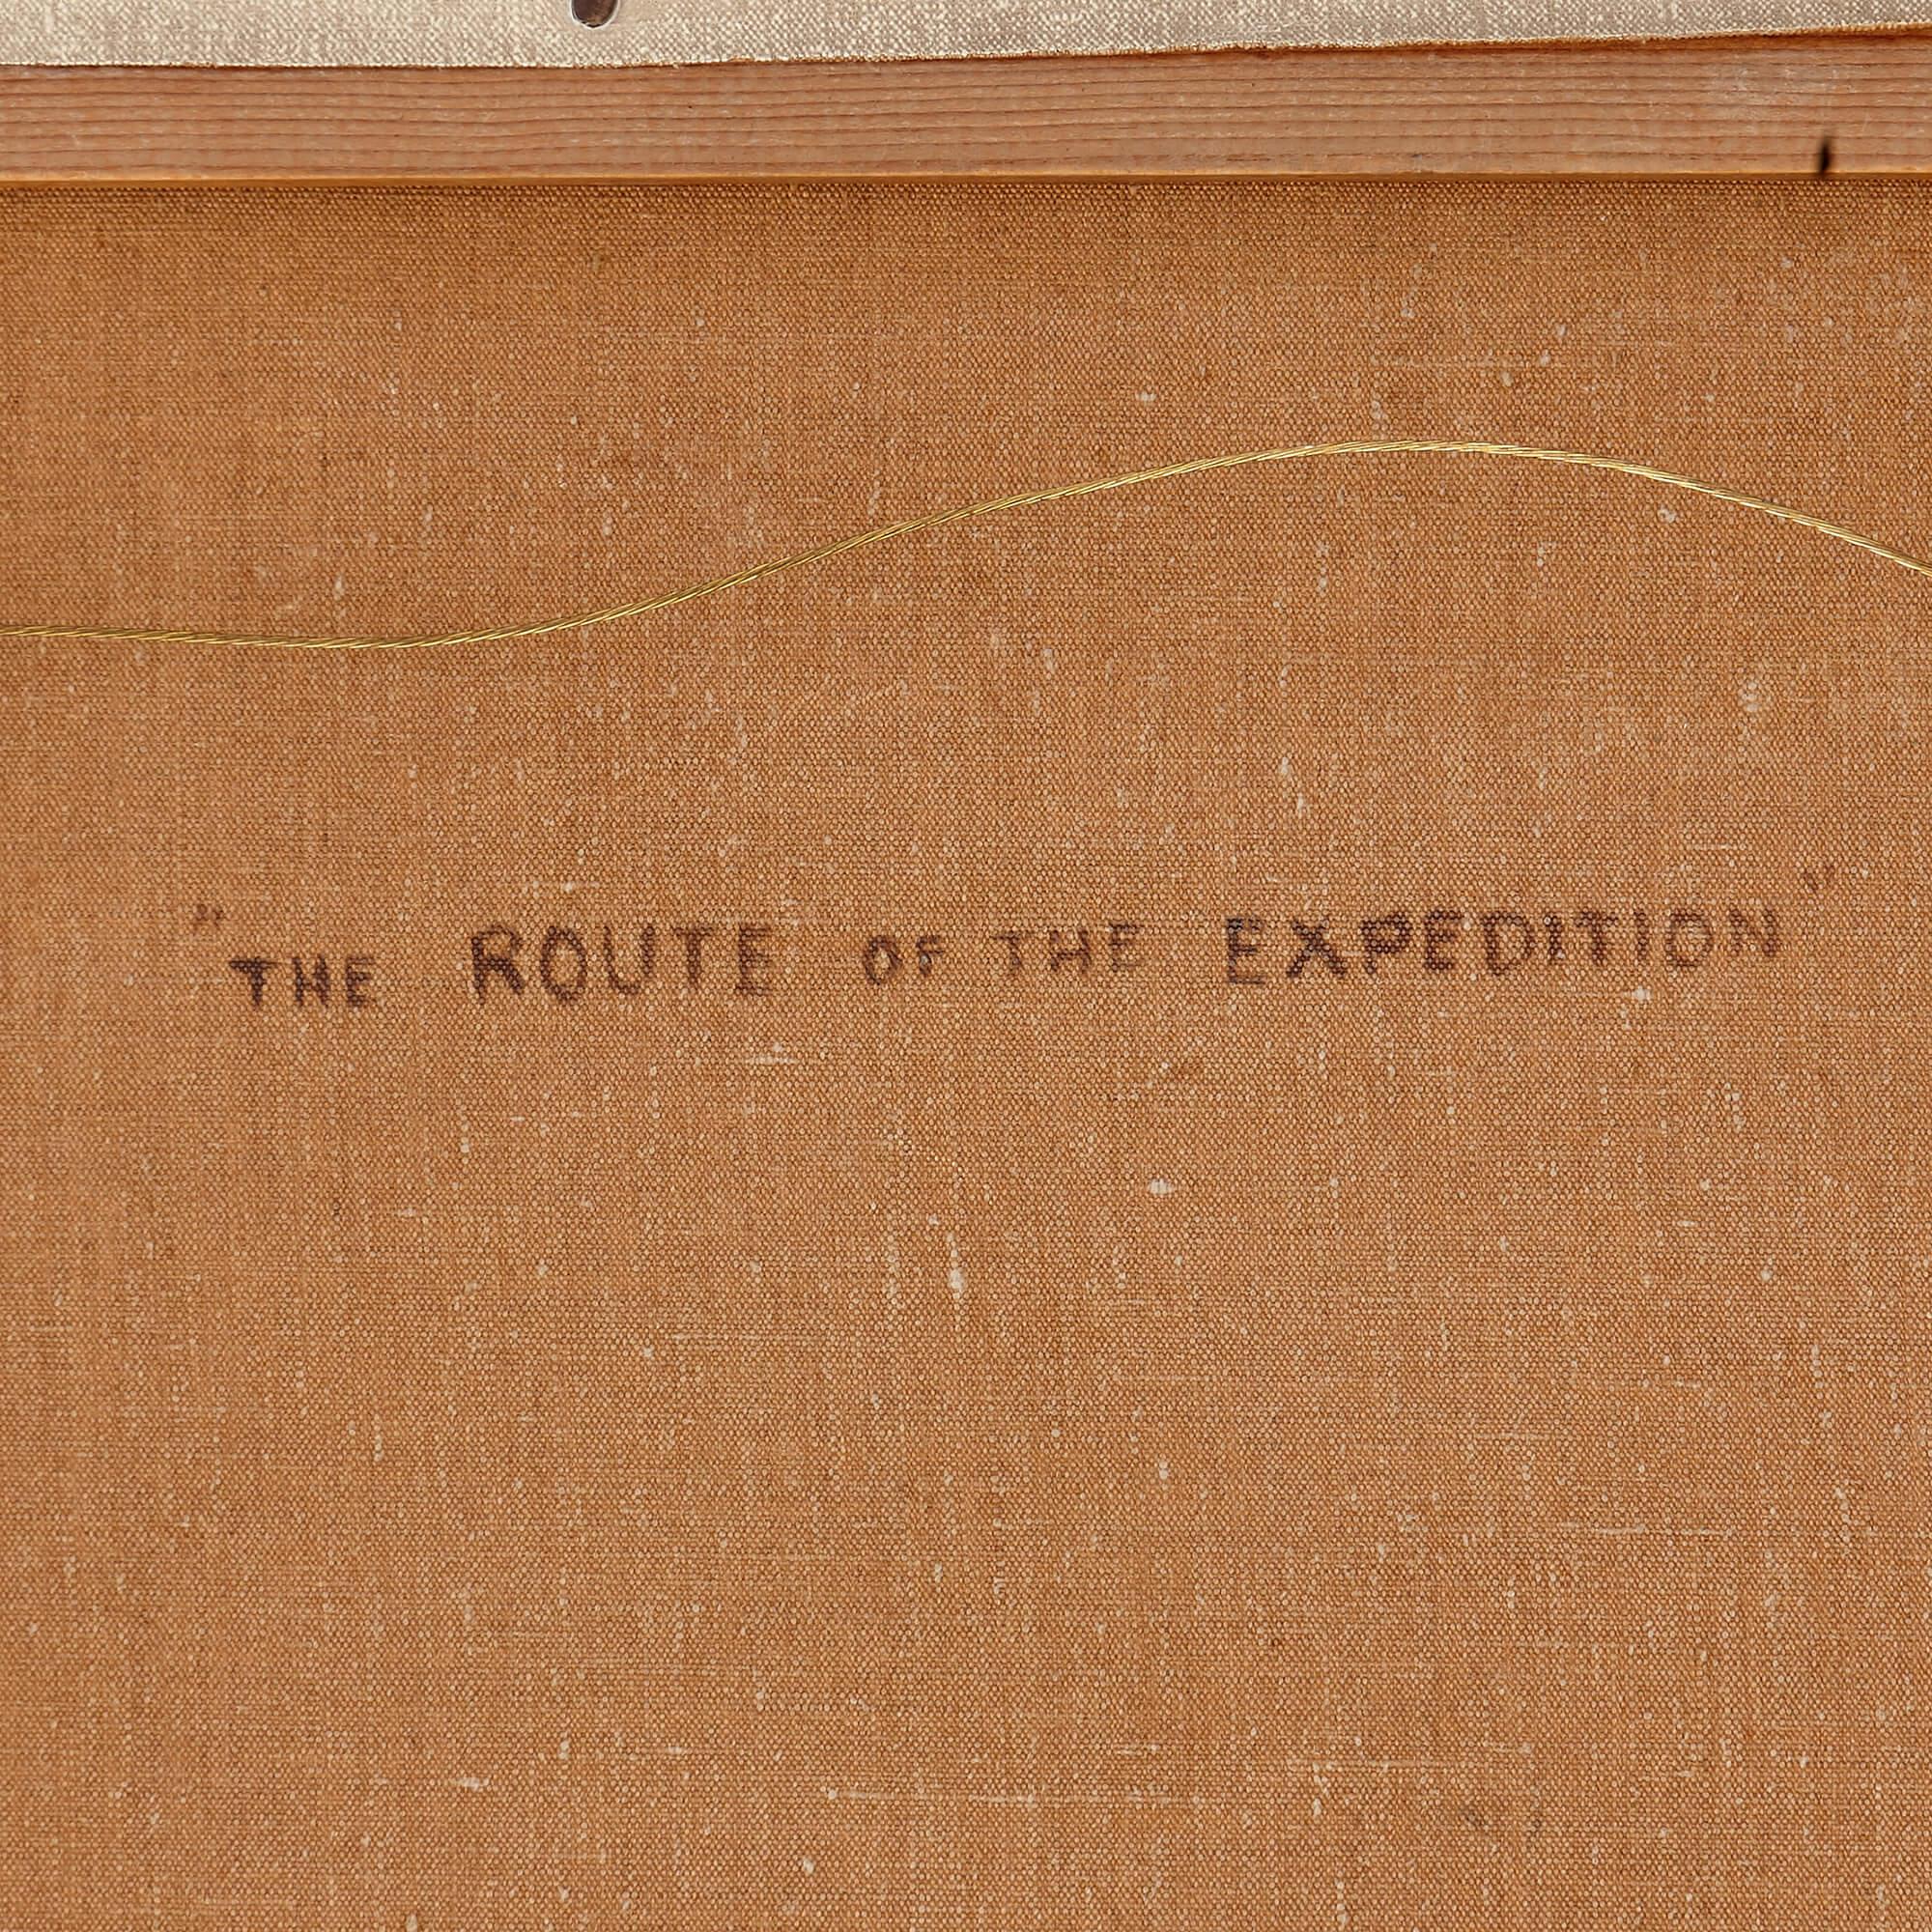 'The Route of the Expedition', oil on canvas group portrait painting - Brown Interior Painting by Charles Willis